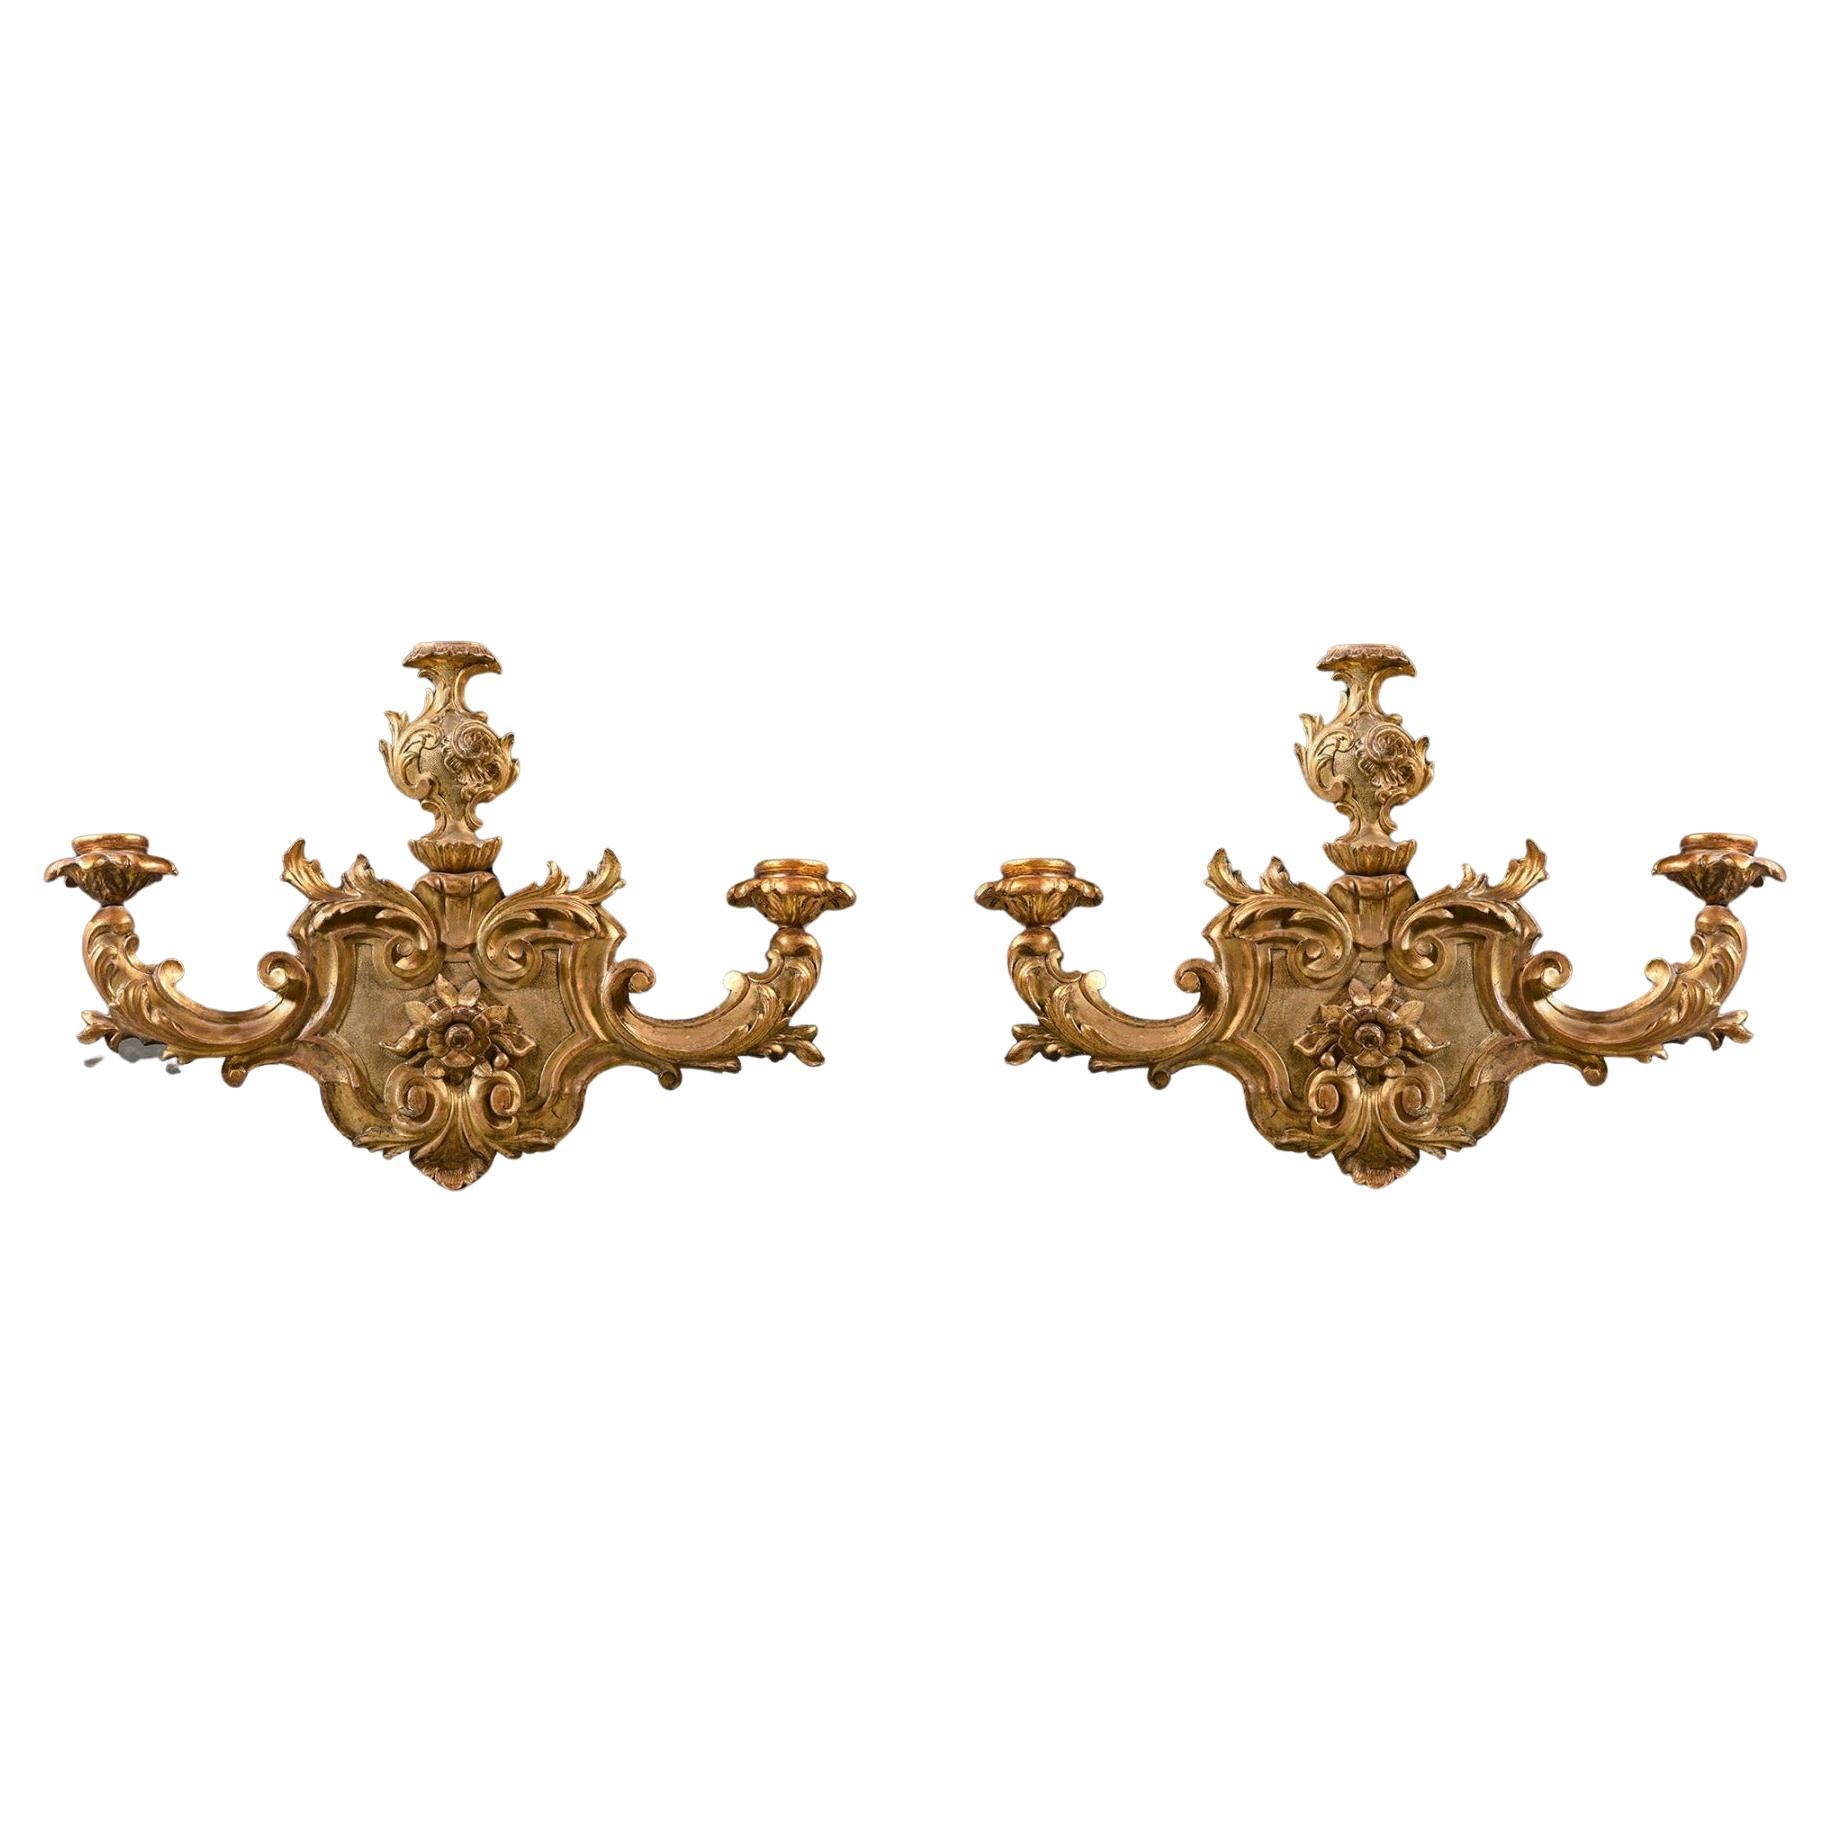 Pair of 18th Century Venetian Giltwood Wall Sconces